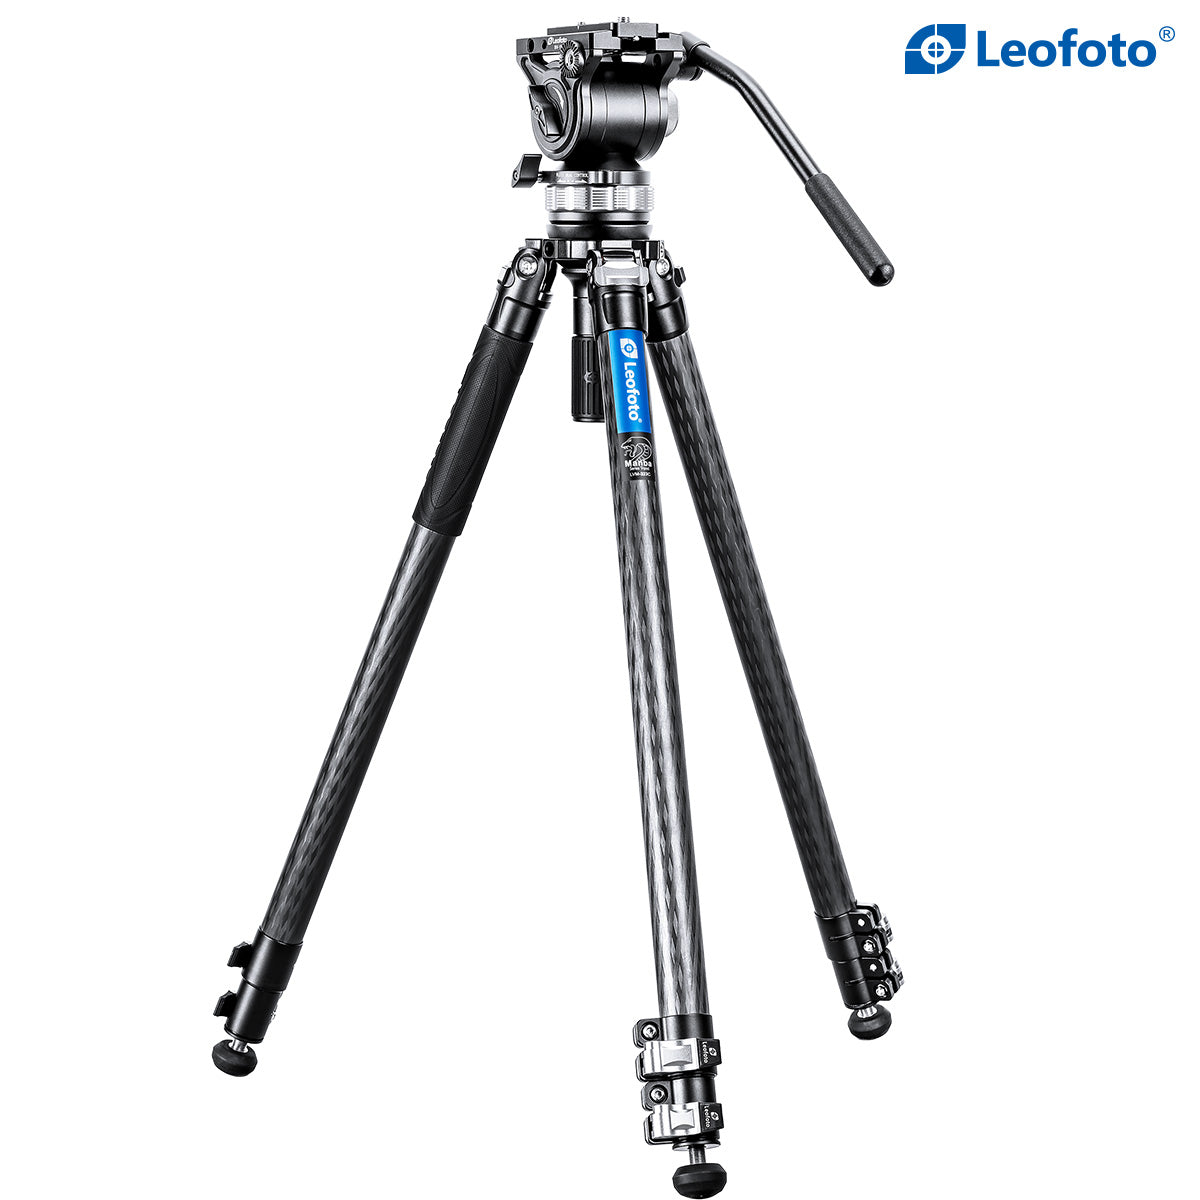 Leofoto LVM-323C+BV-15 3-Section Carbon Fiber Video Tripod with Fluid Head Set | 75mm Integrated Bowl with Leveling Base and Handle